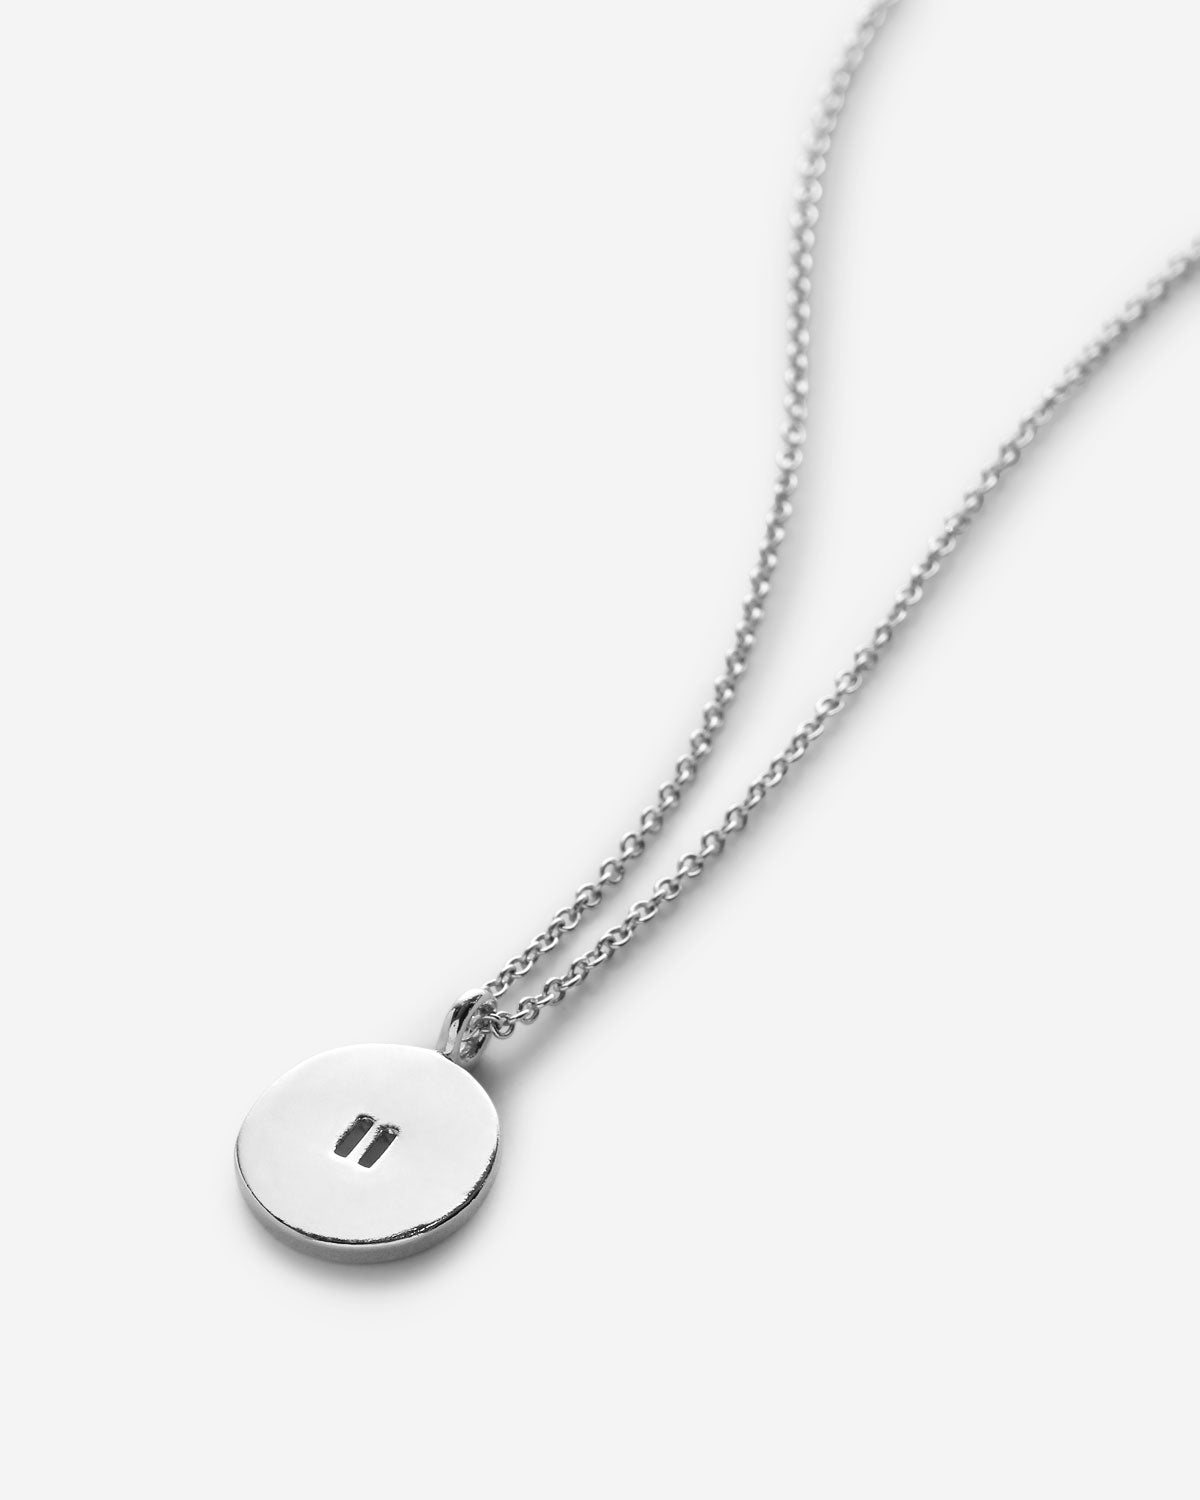 Close-up of Pause Necklace in silver finish